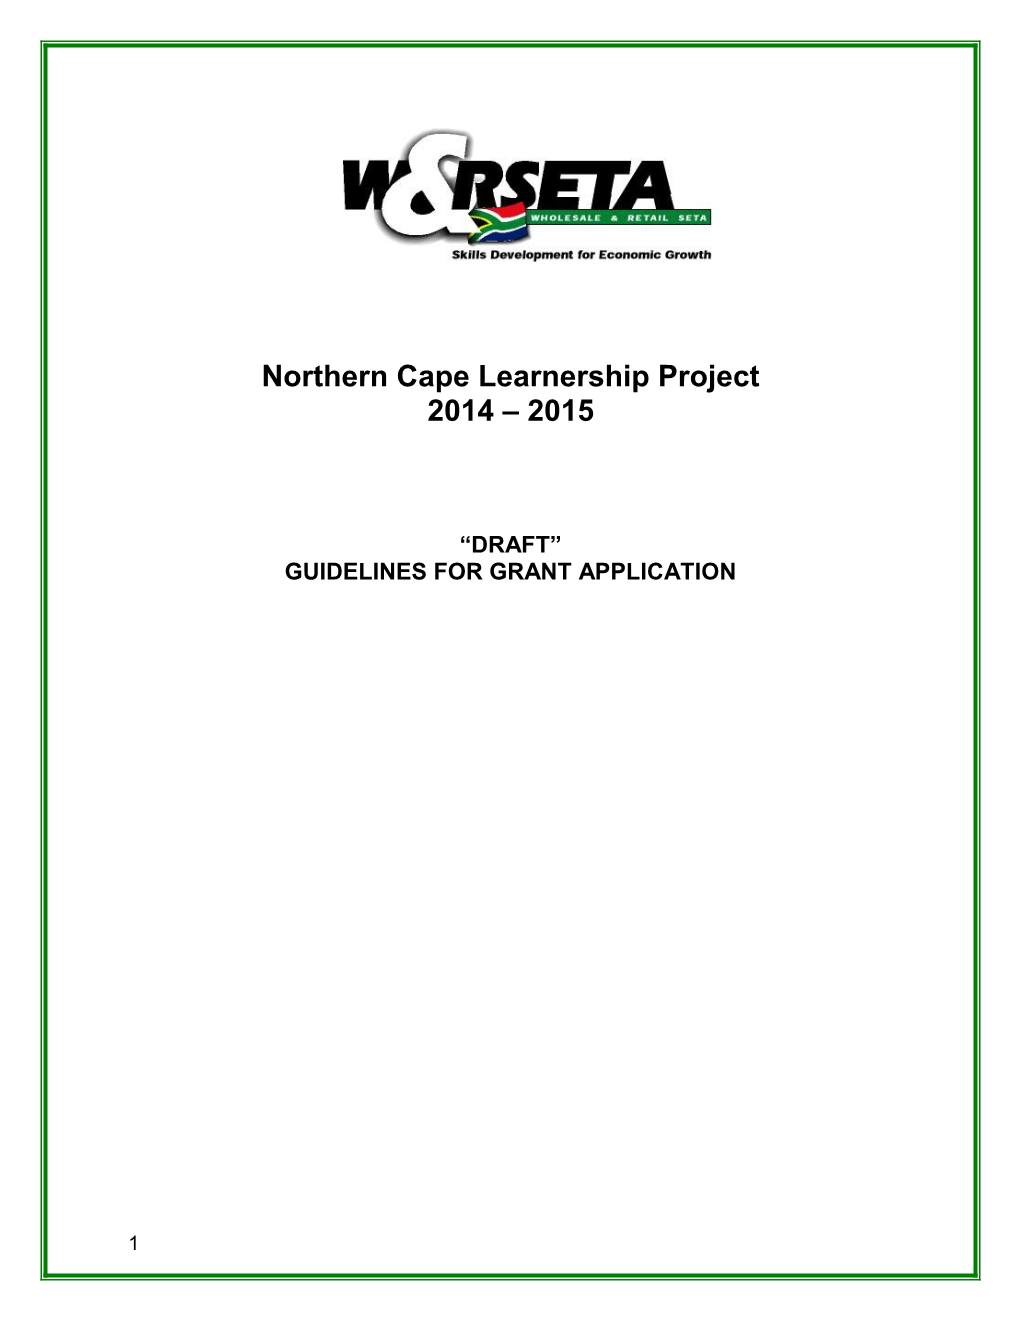 Northern Cape Learnership Project